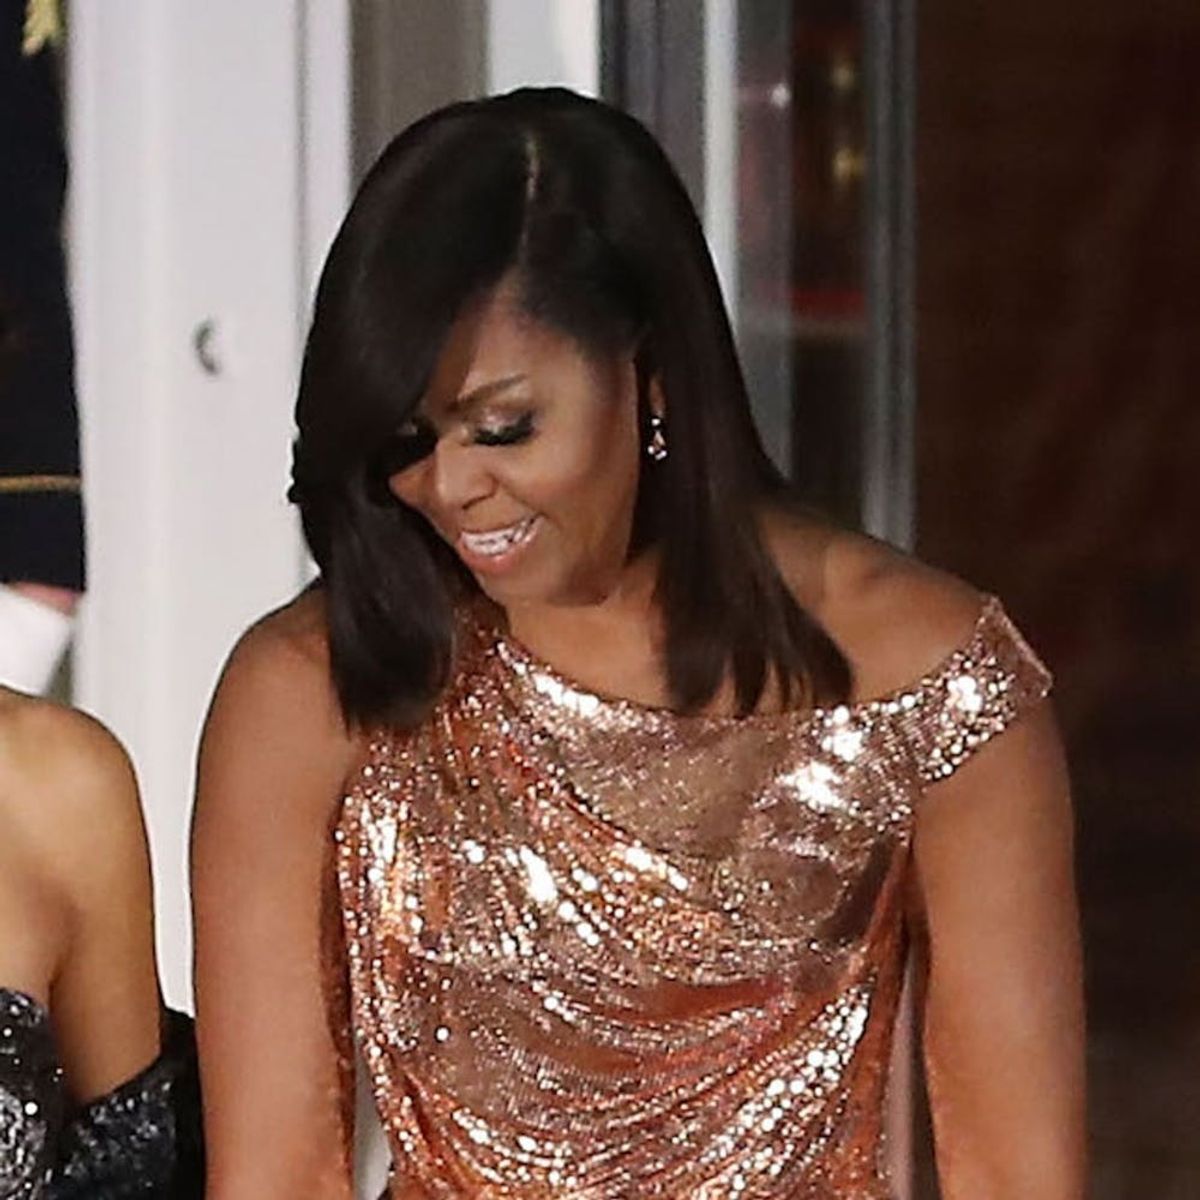 Morning Buzz! Michelle Obama’s Rose Gold Dress for Her Final State Dinner Was BREATHTAKING + More